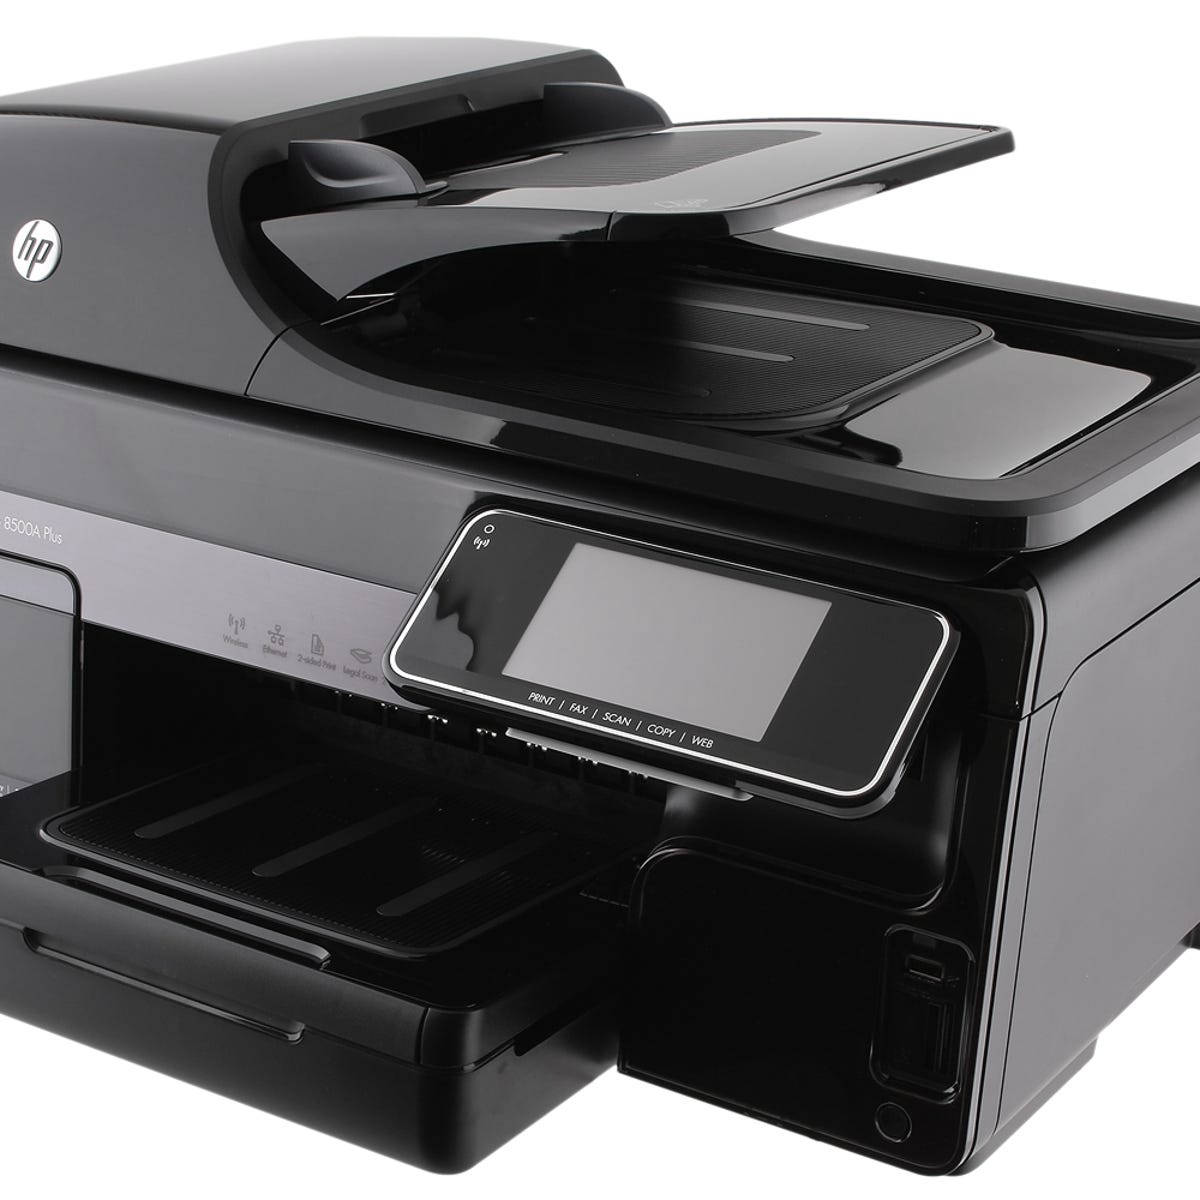 Hp officejet pro 8500a download software download youtube mp3 converter for pc